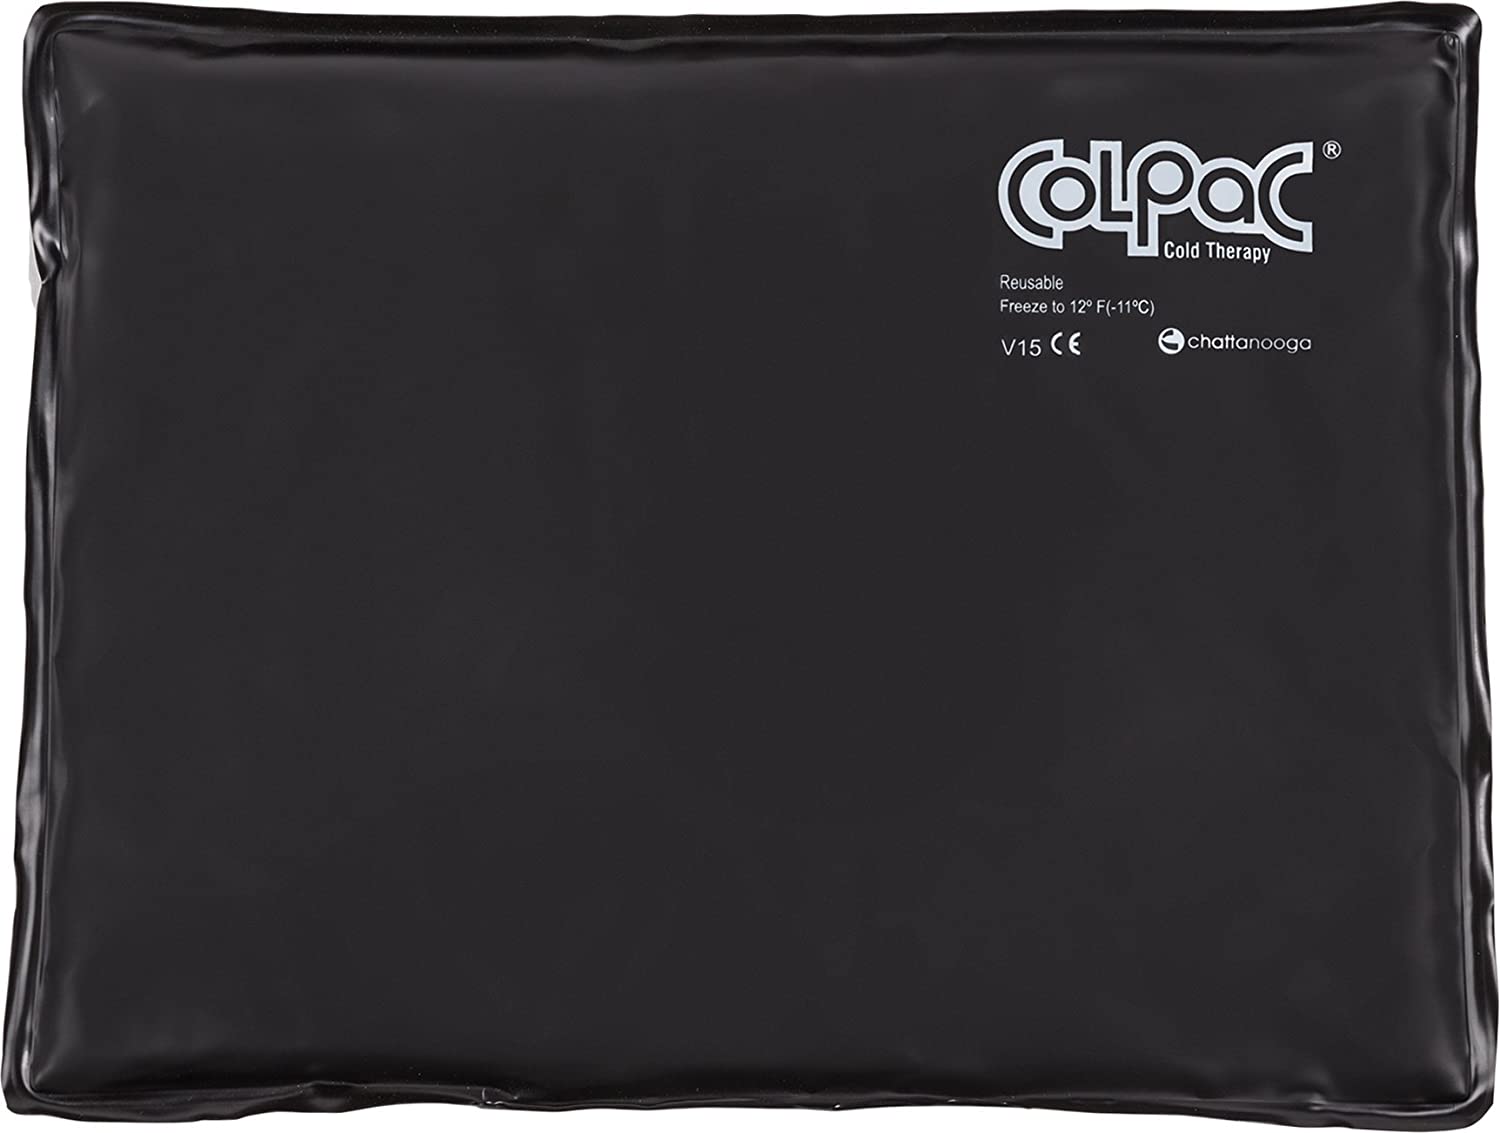 Chattanooga ColPac - Reusable Gel Ice Pack - Black Polyurethane - Standard - 10 in x 13.5 in - Cold Therapy - Knee, Arm, - image 1 of 5